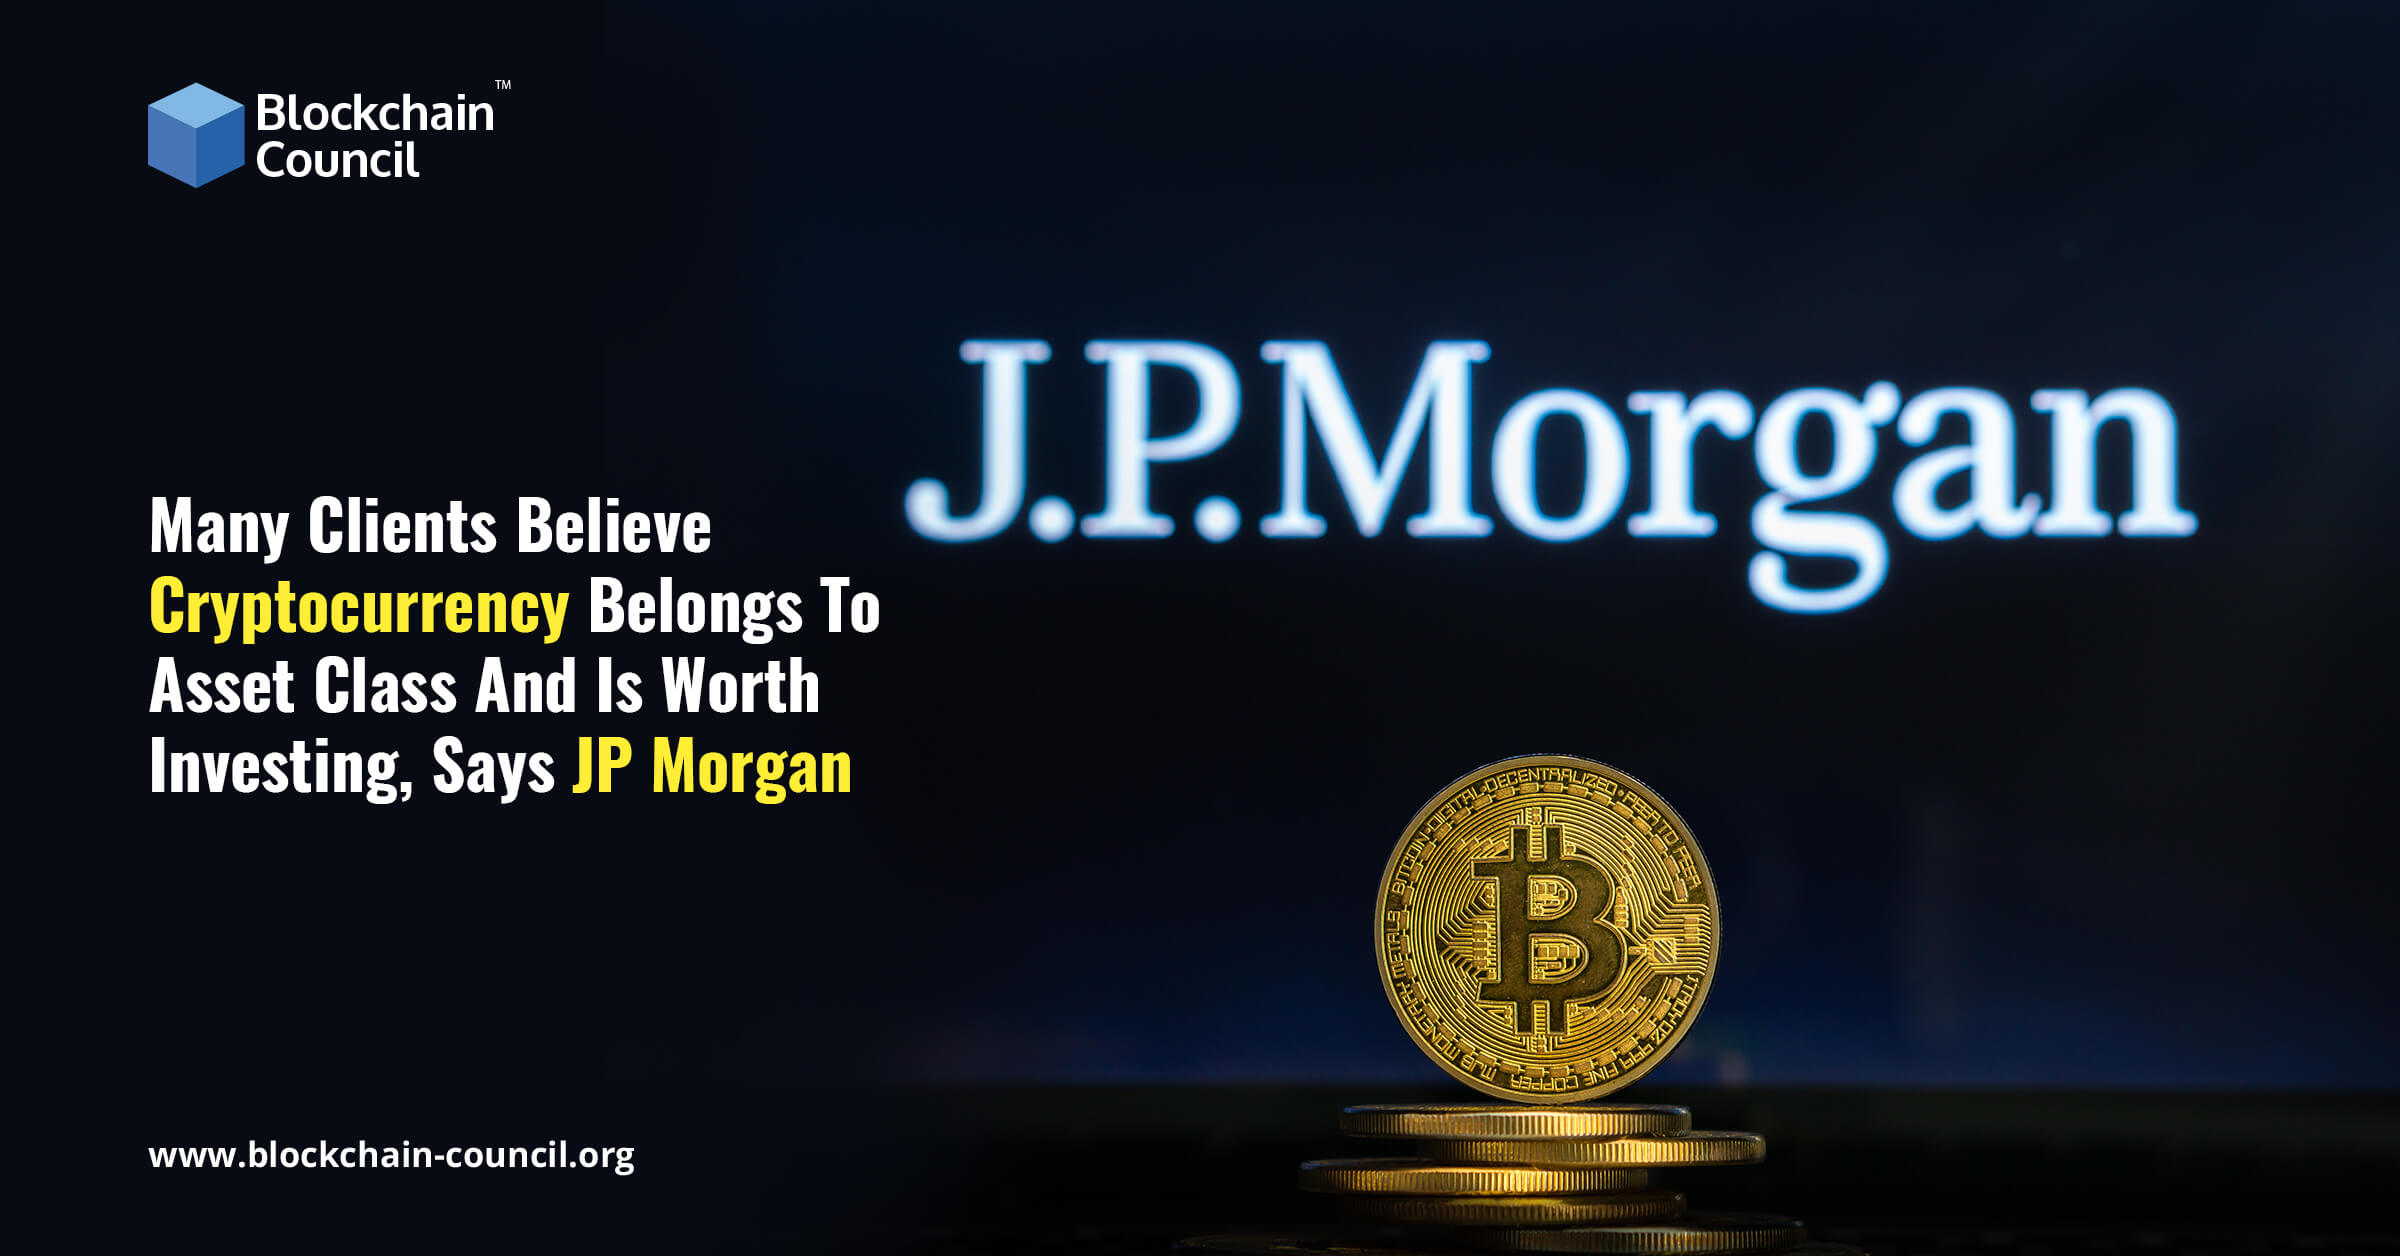 Many Clients Believe Cryptocurrency Belongs To Asset Class And Is Worth Investing, Says JP Morgan